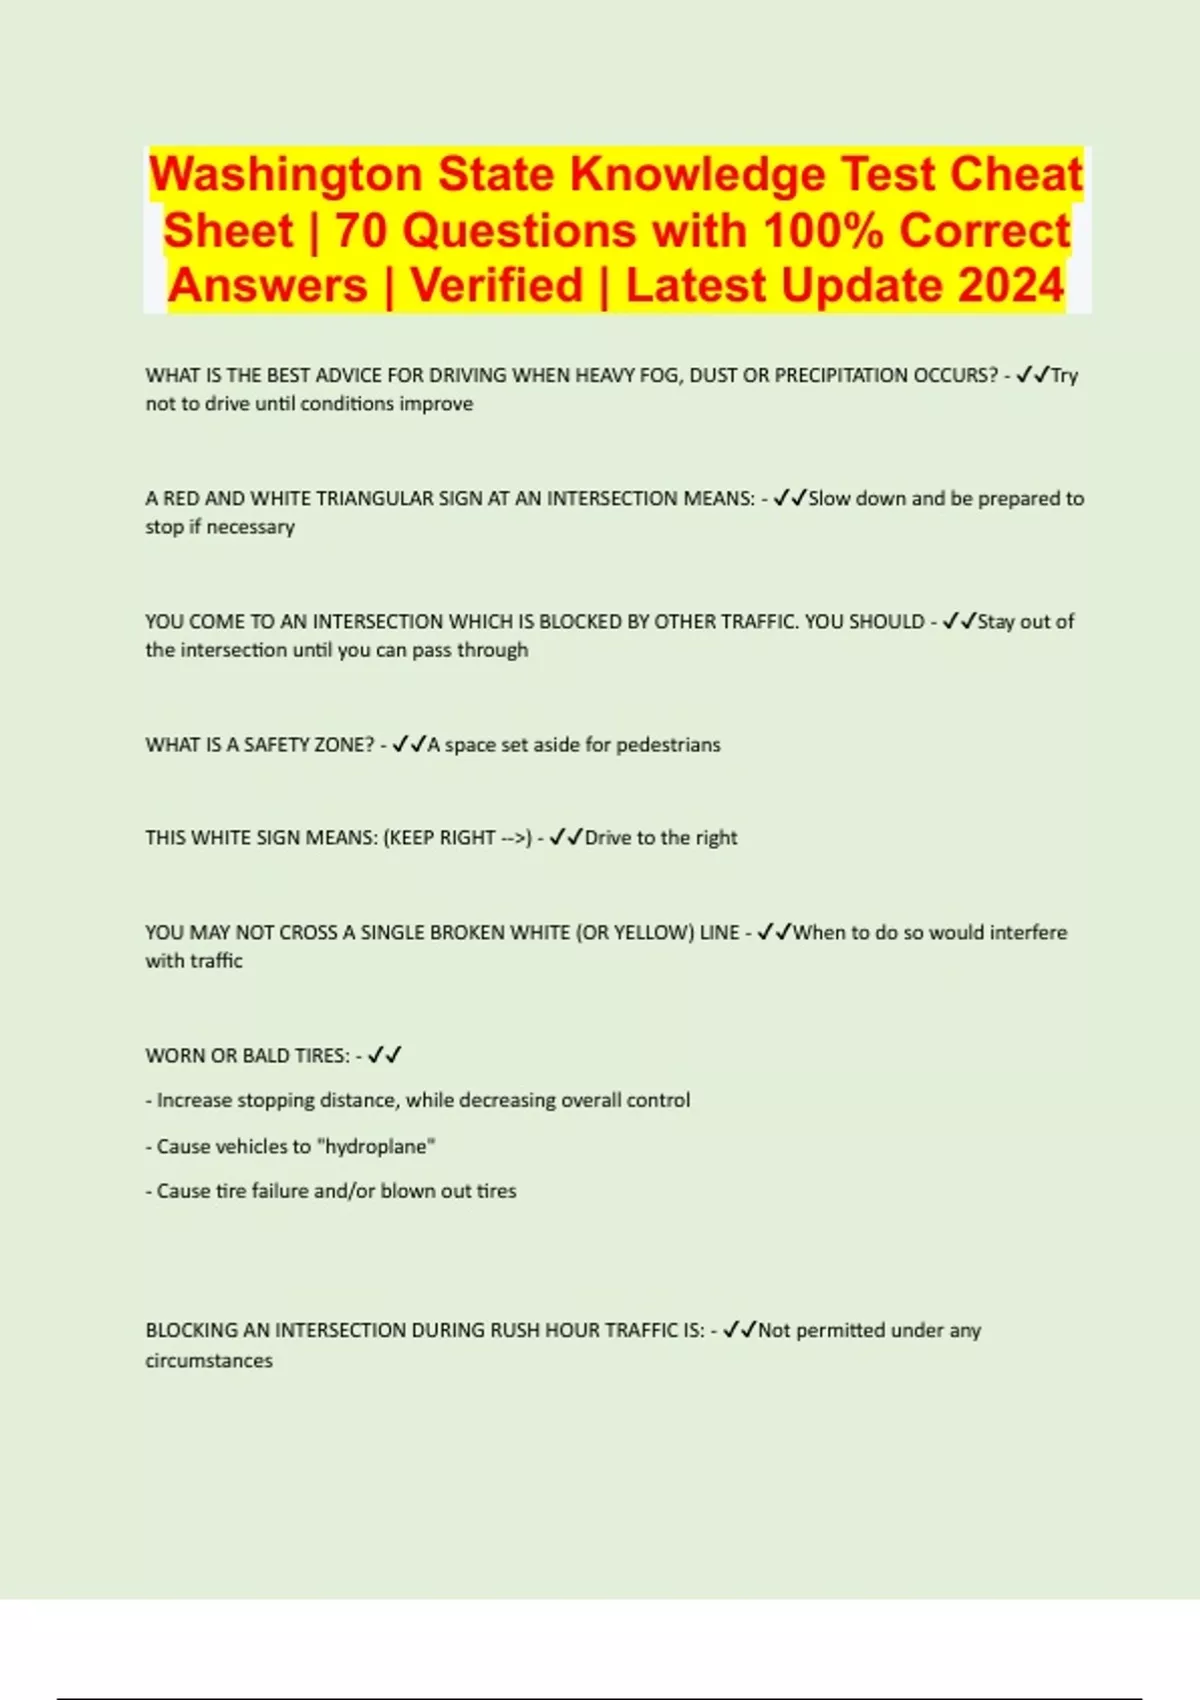 Washington State Knowledge Test Cheat Sheet 70 Questions with 100